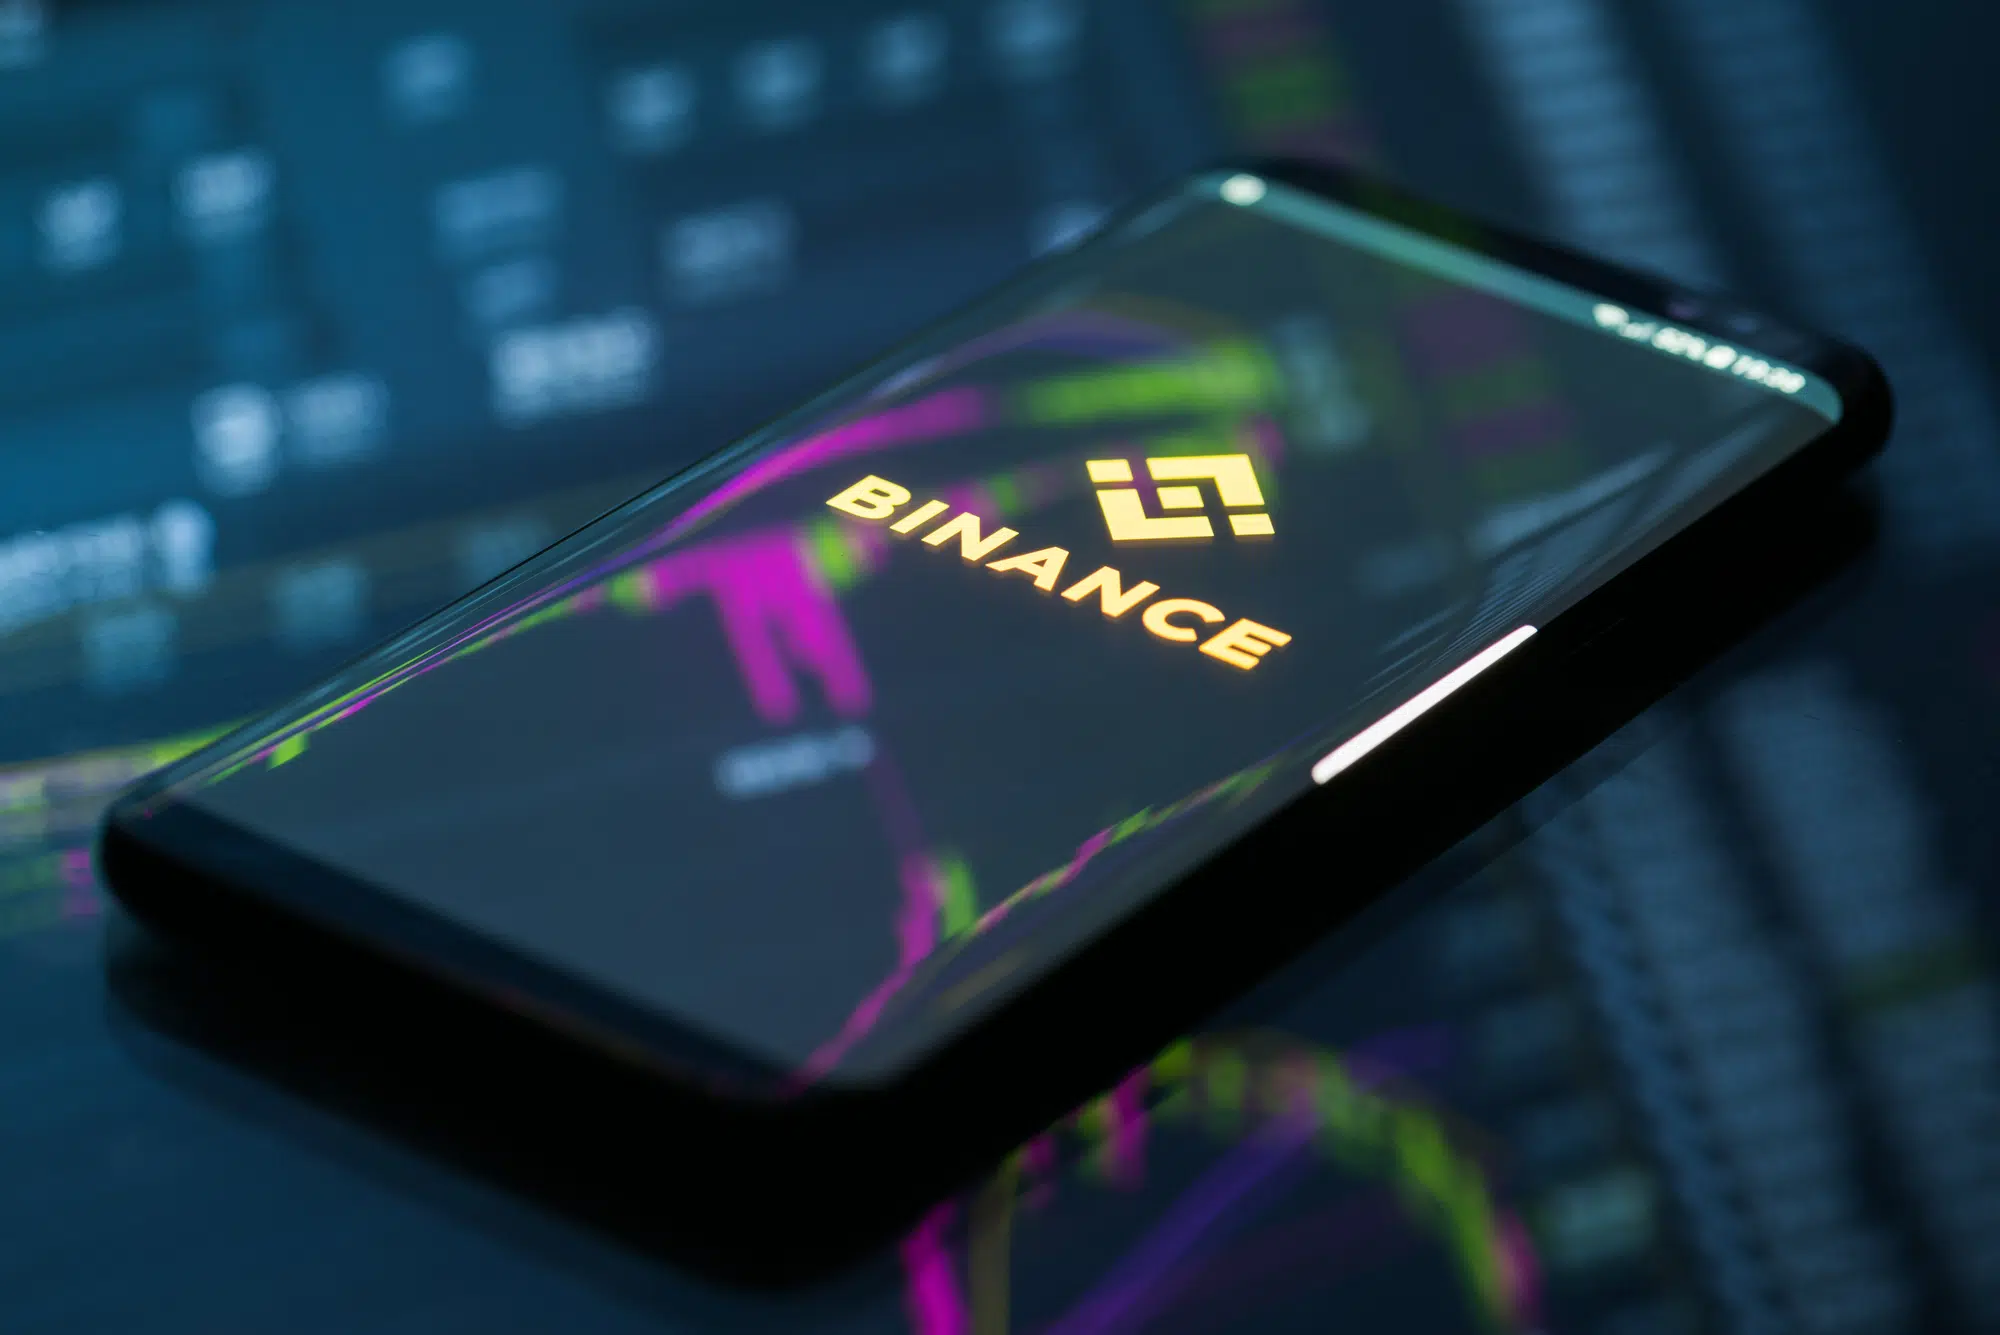 Binance and founder Changpeng Zhao violated compliance rules to attract U.S. users, CFTC alleges